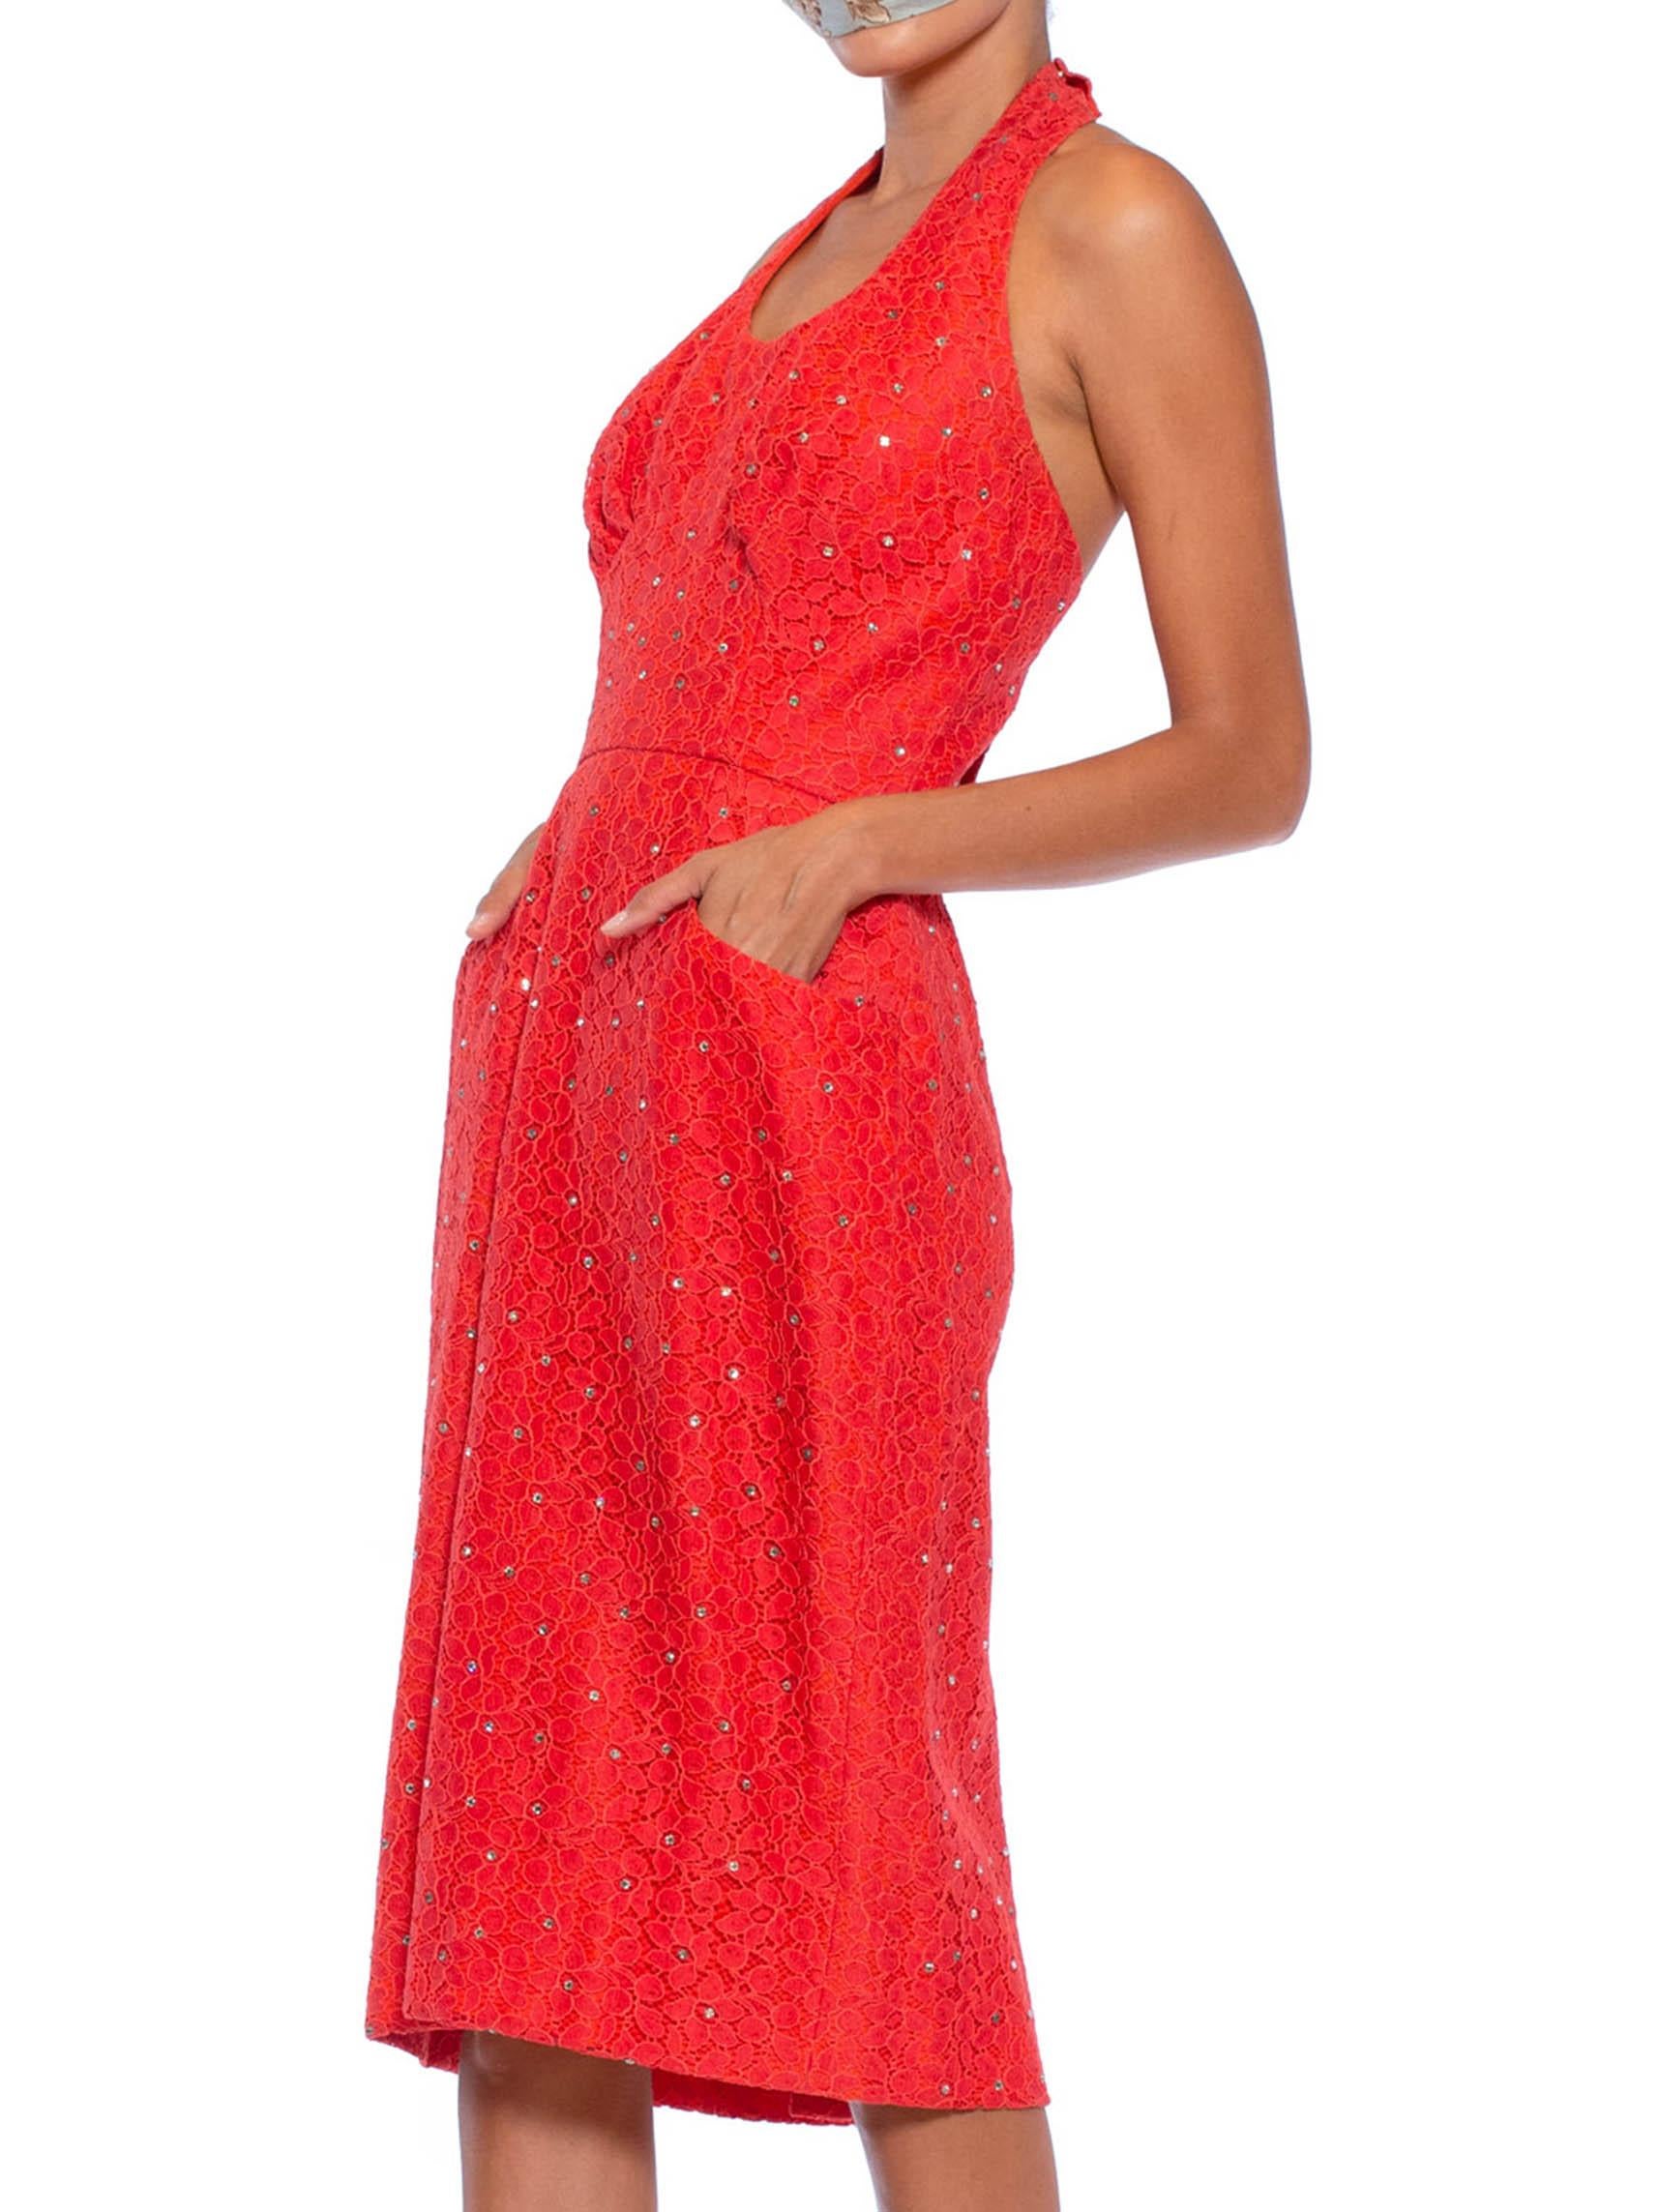 red lace halter dress